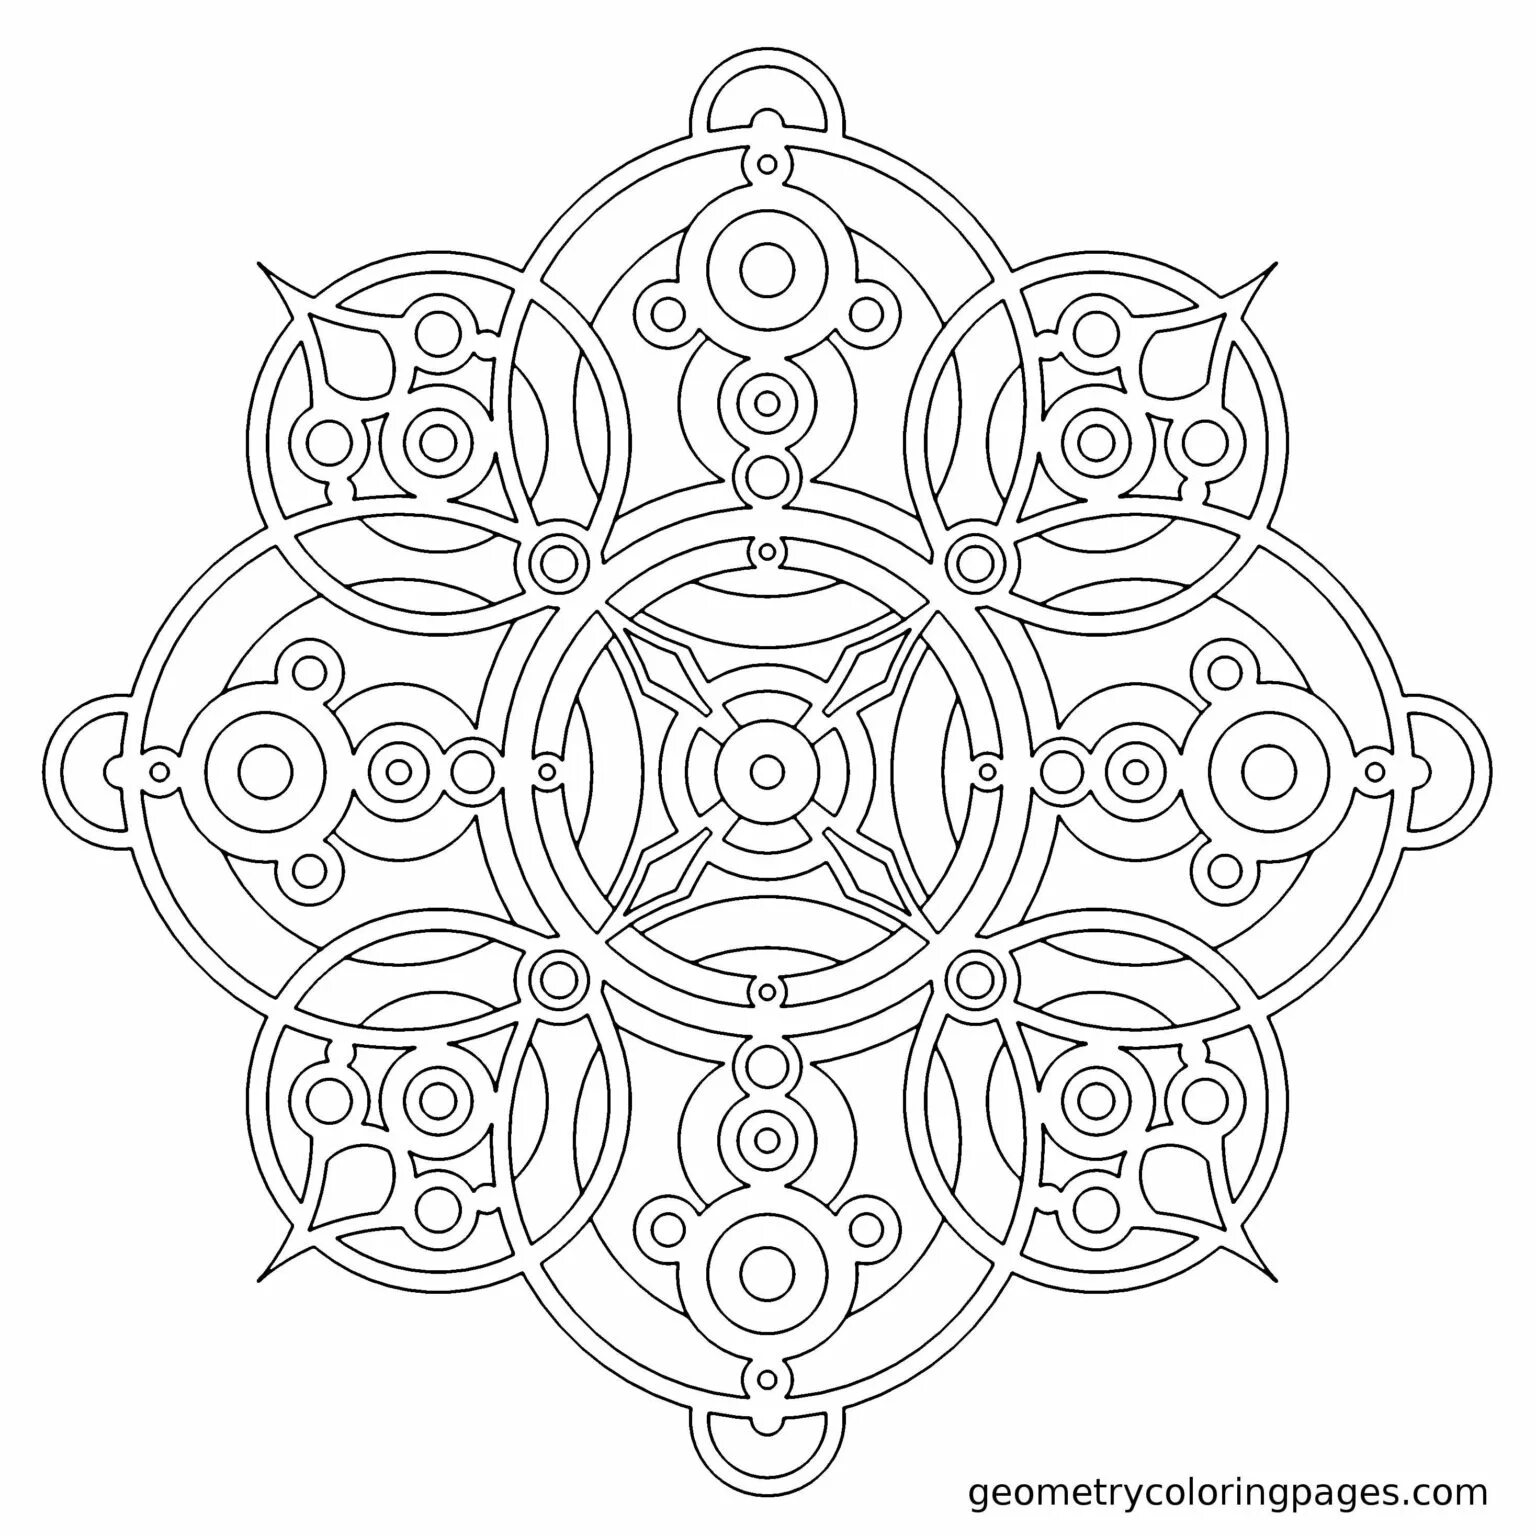 Mystical coloring meaning of the mandala